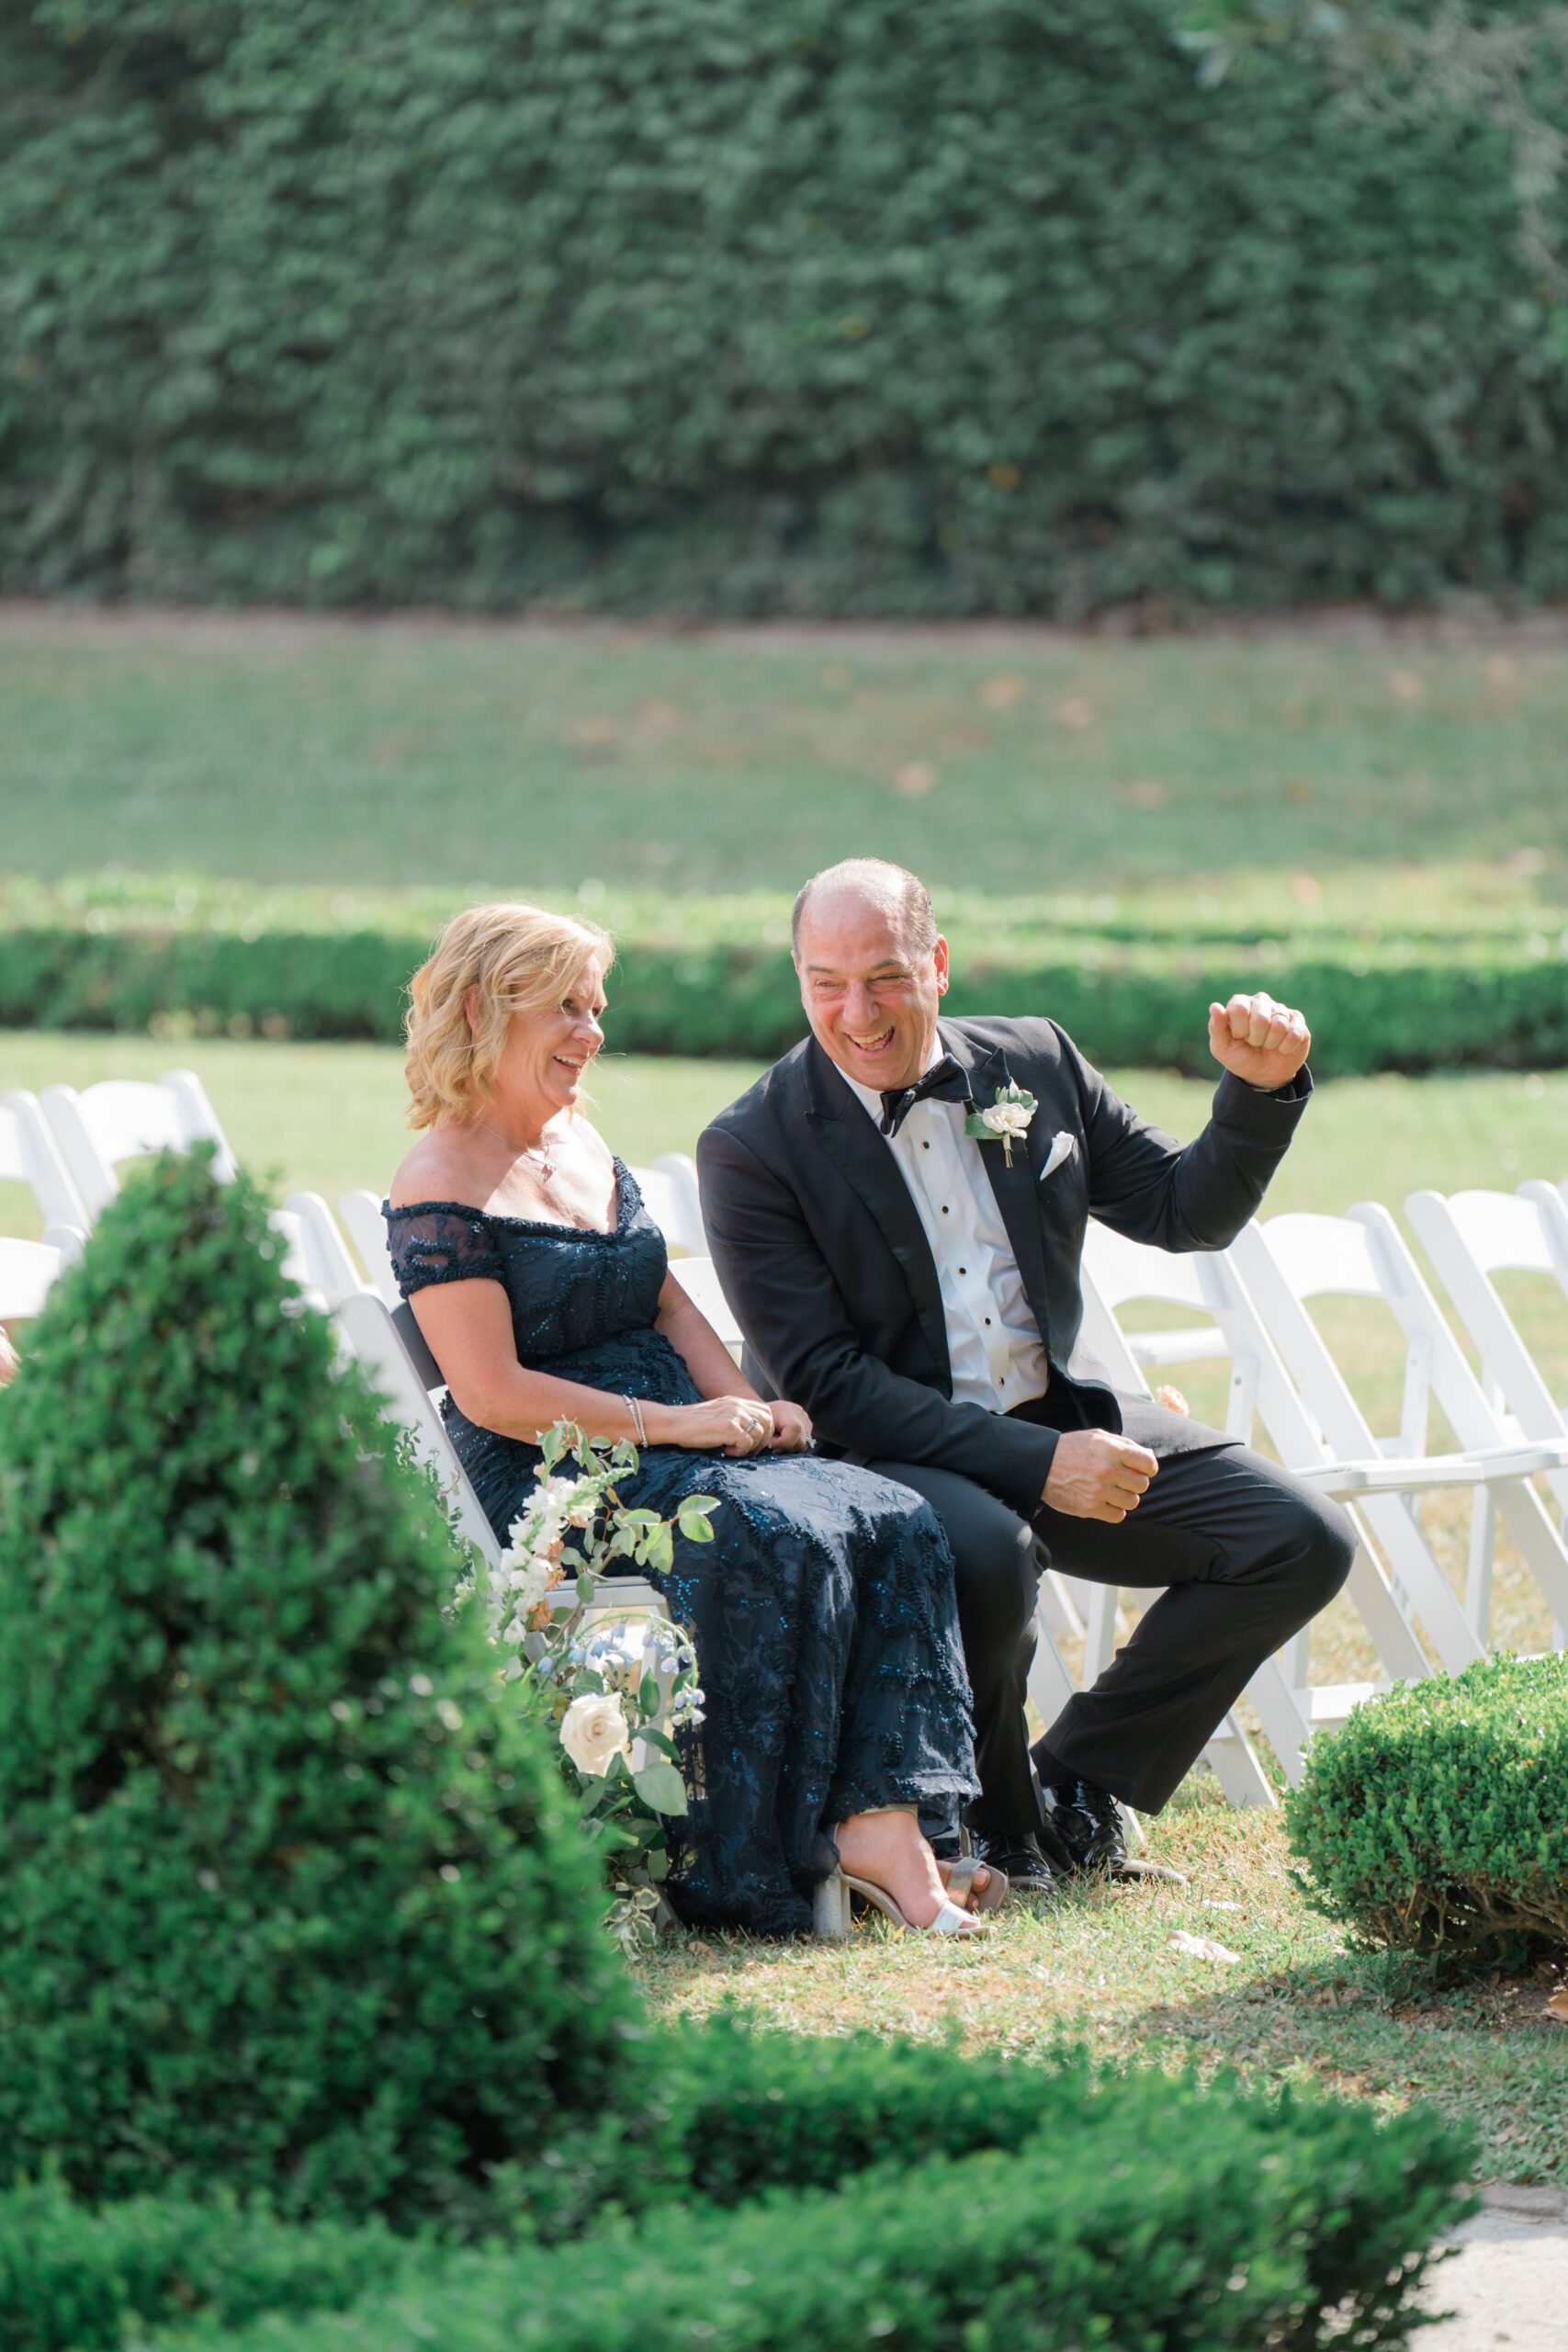 Parents of the bride celebrate during outdoor wedding ceremony in Charleston